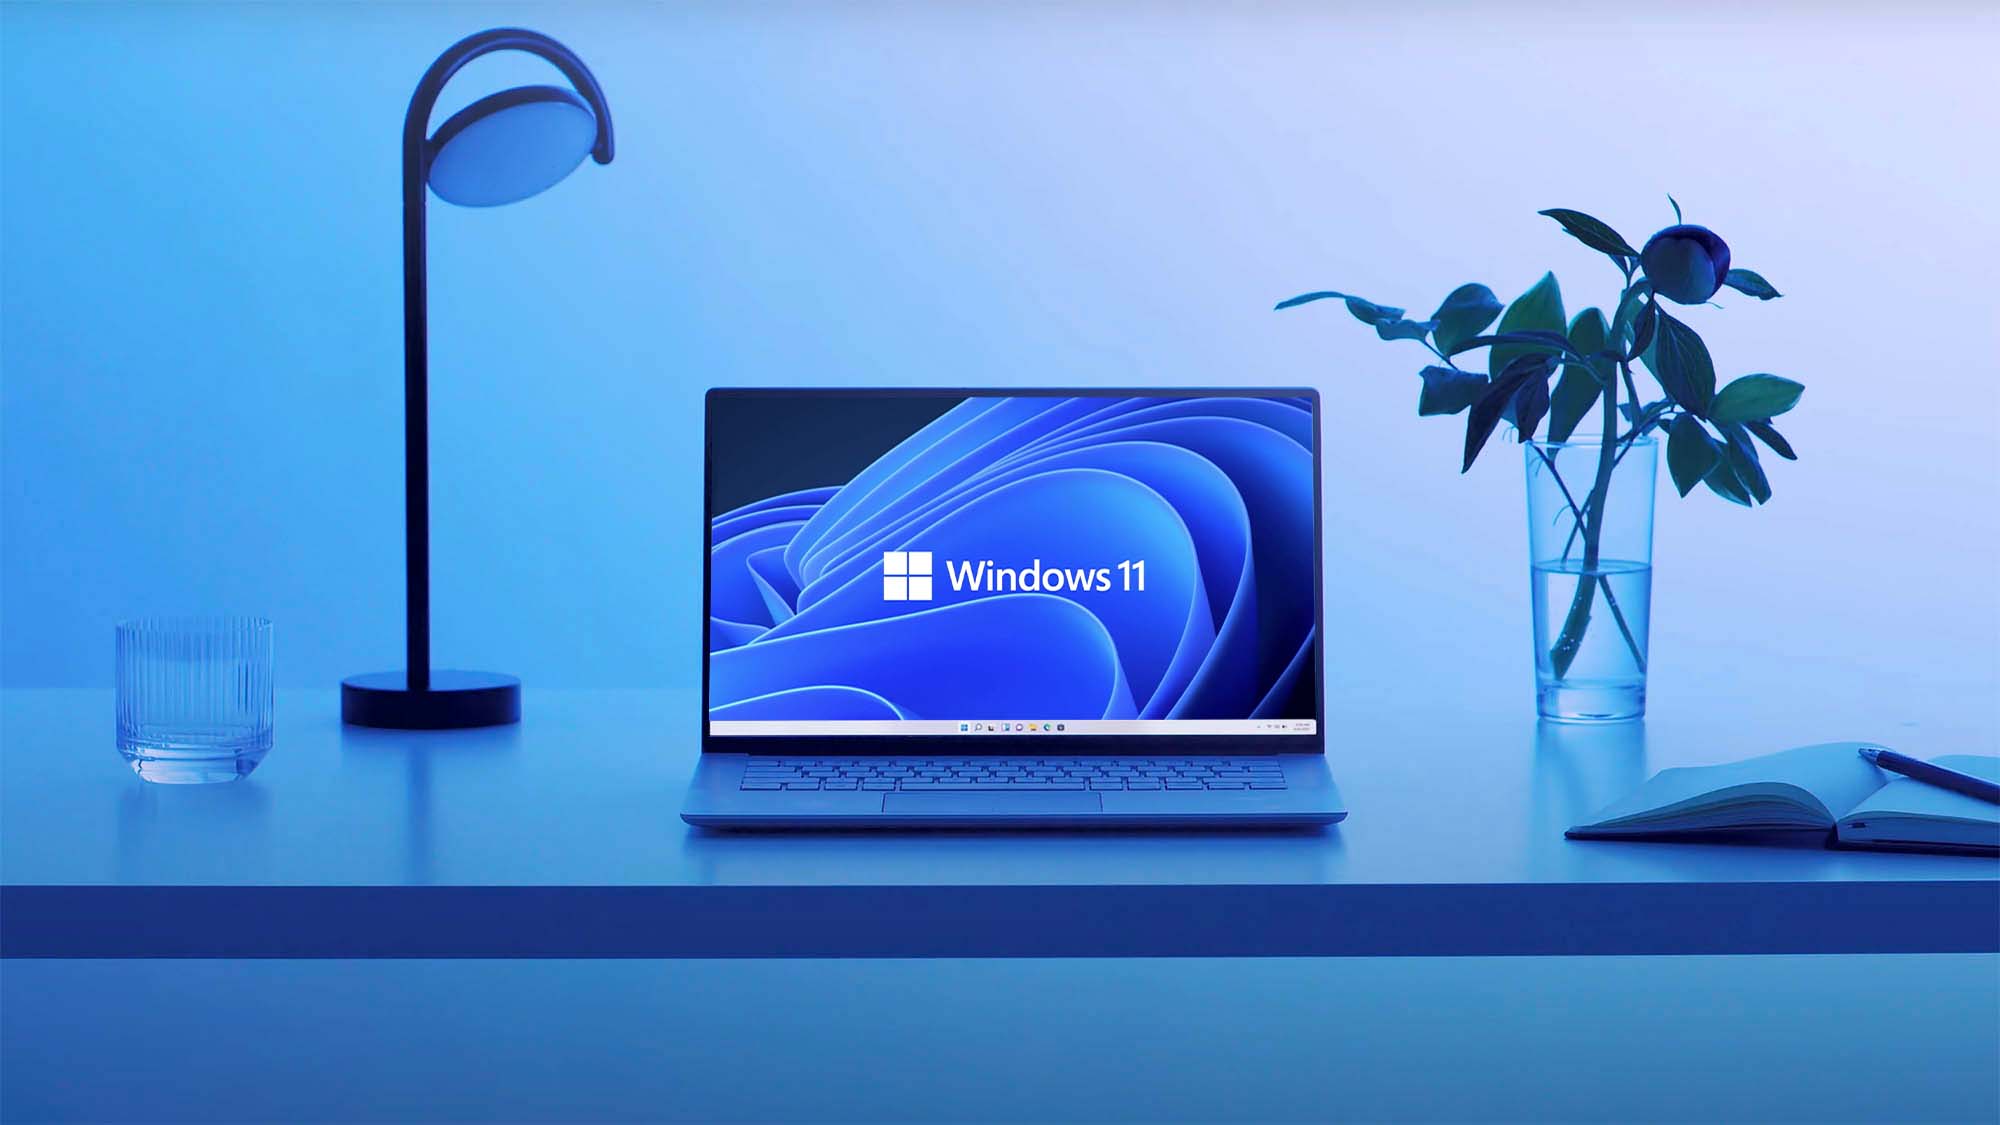  What are the requirements to run Windows 11?